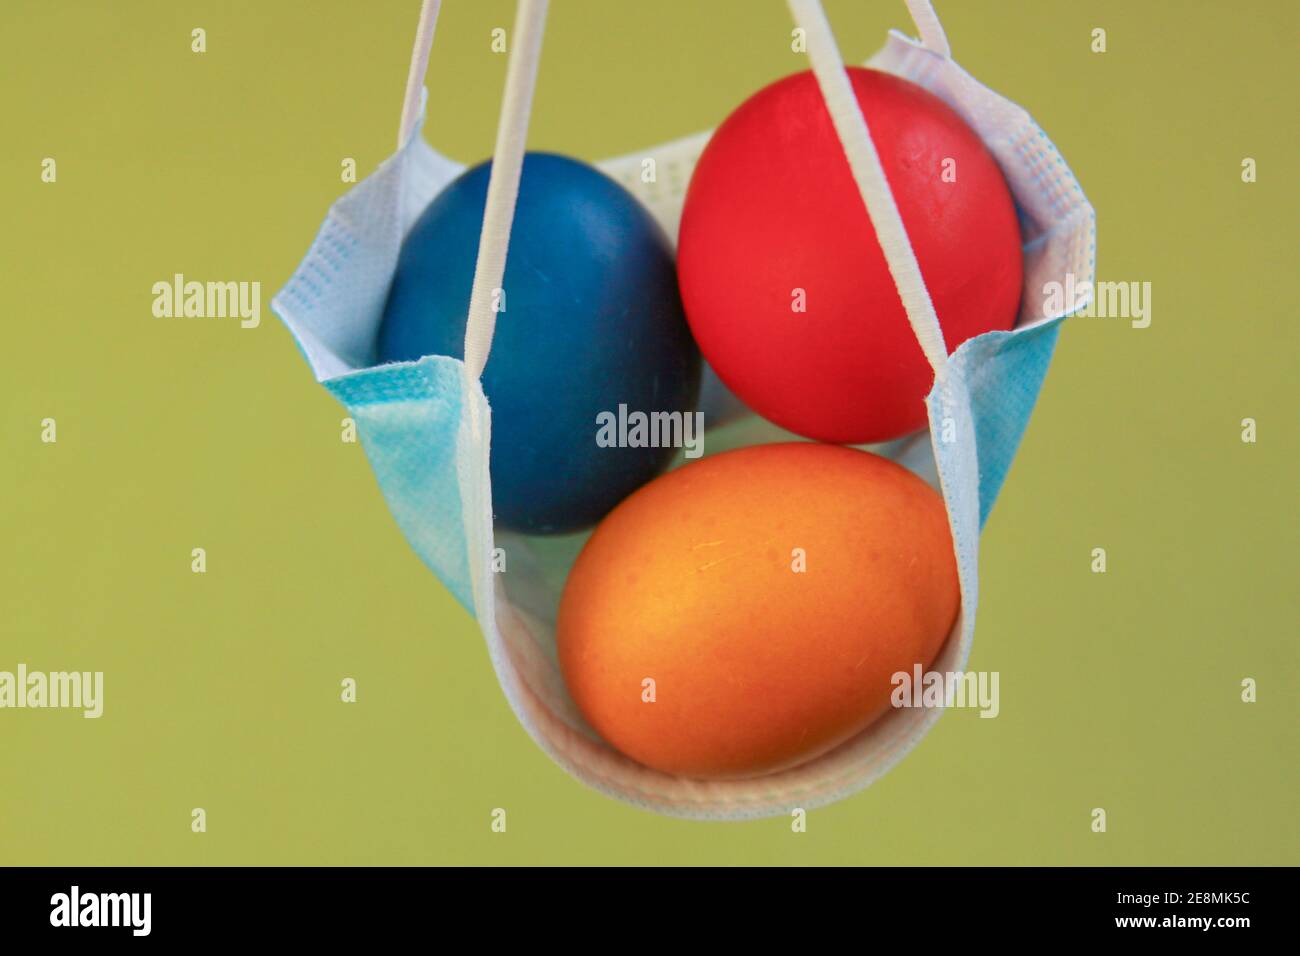 Isolated colored painted Easter eggs in surgical mask, a symbol of coronavirus pandemic. Safety first while celebrating Easter 2020 covid 19 outbreak Stock Photo